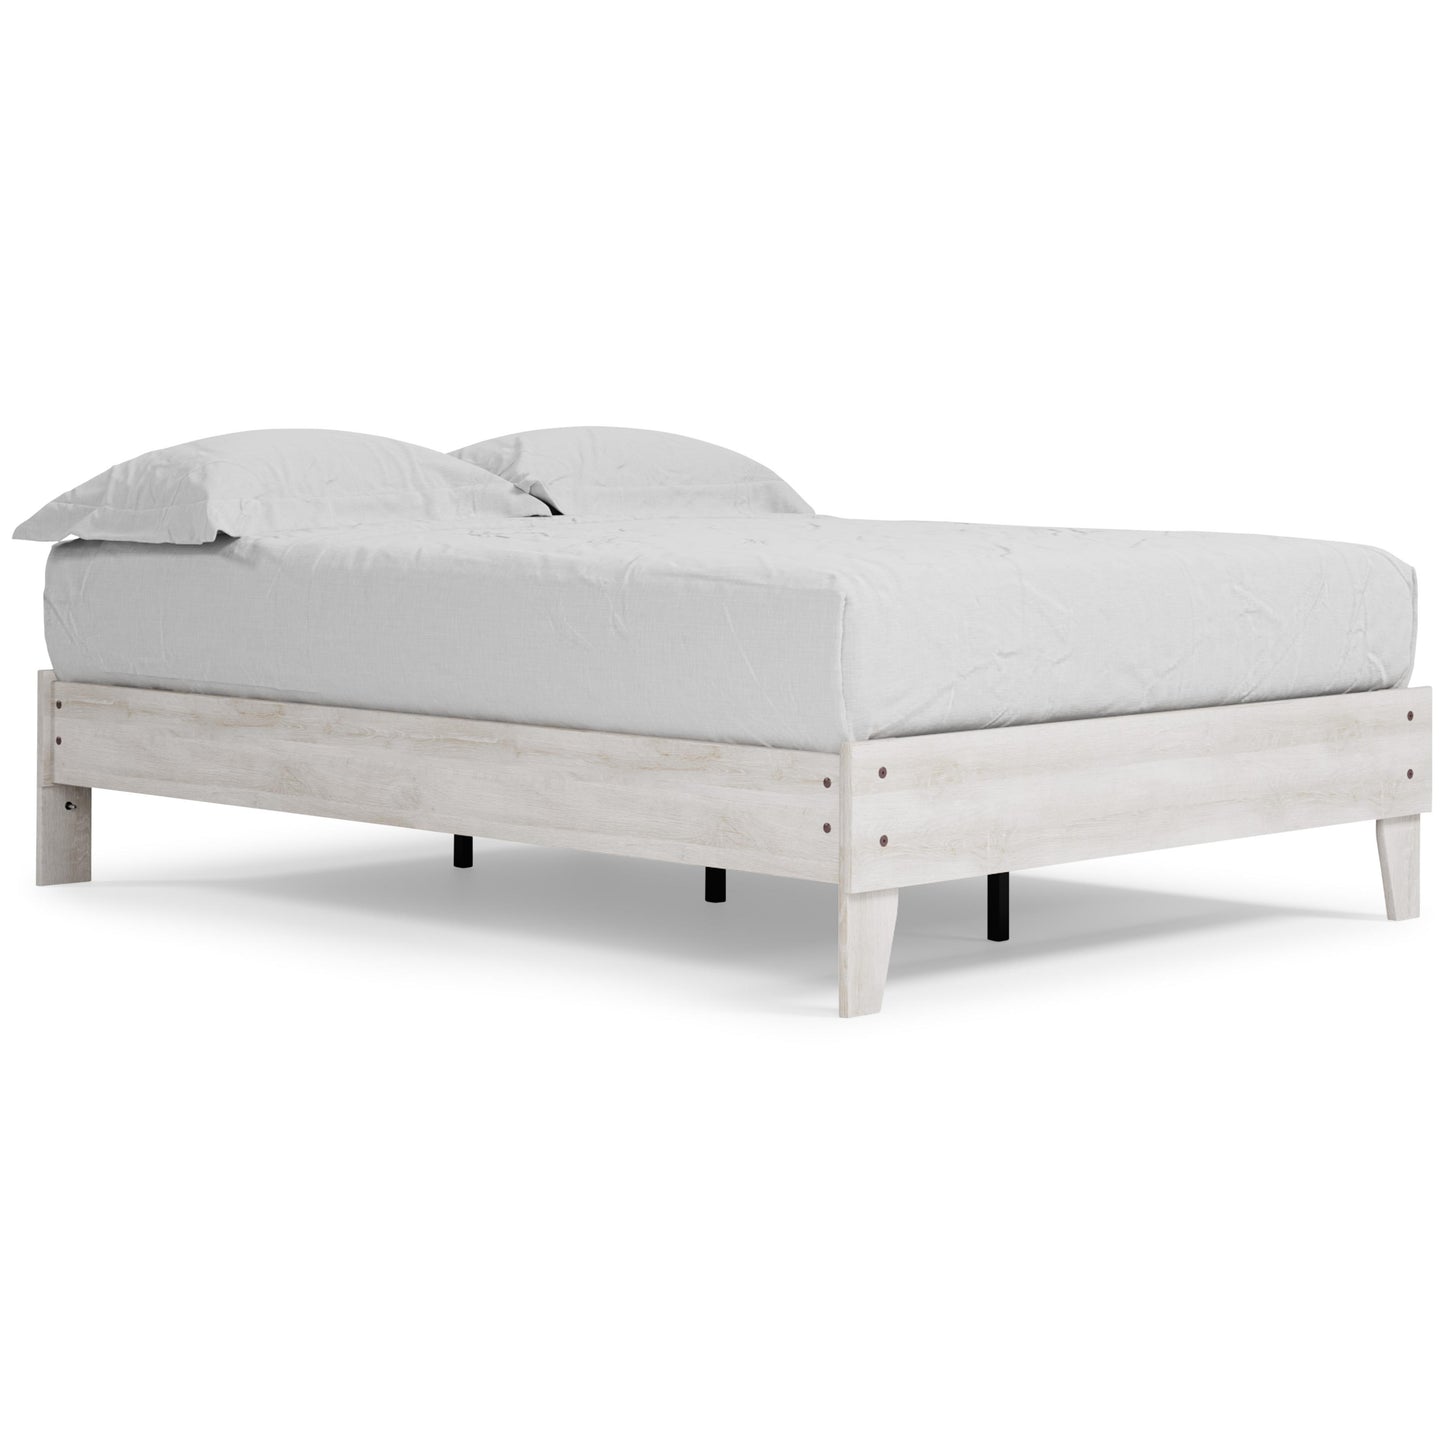 Signature Design by Ashley Kids Beds Bed EB4121-112 IMAGE 1